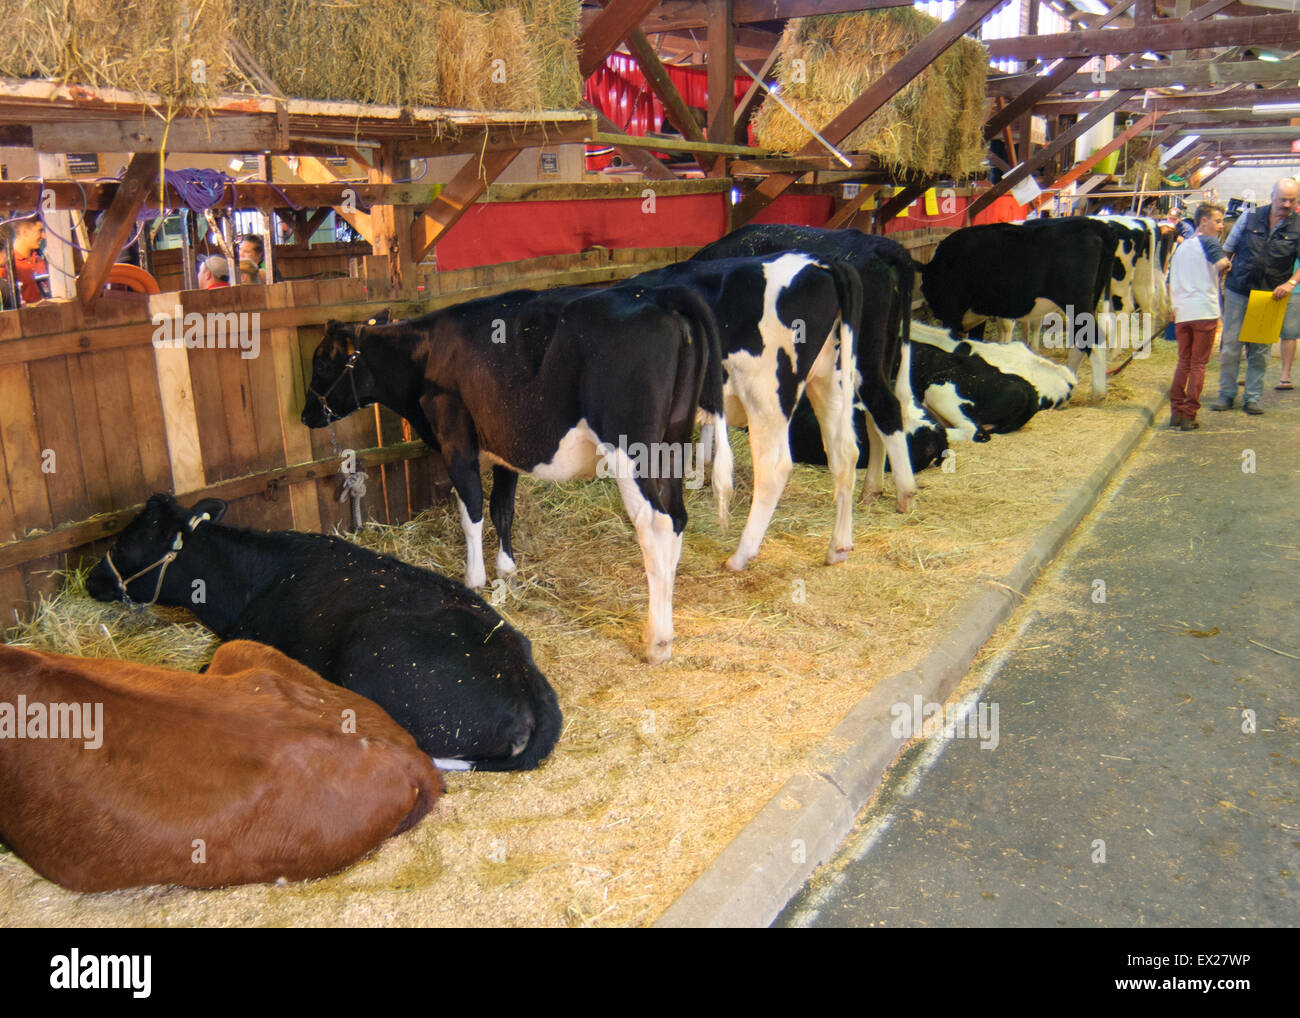 Preparing dairy cattle to the show at Royal Adelaide Show,  South Australia. Stock Photo